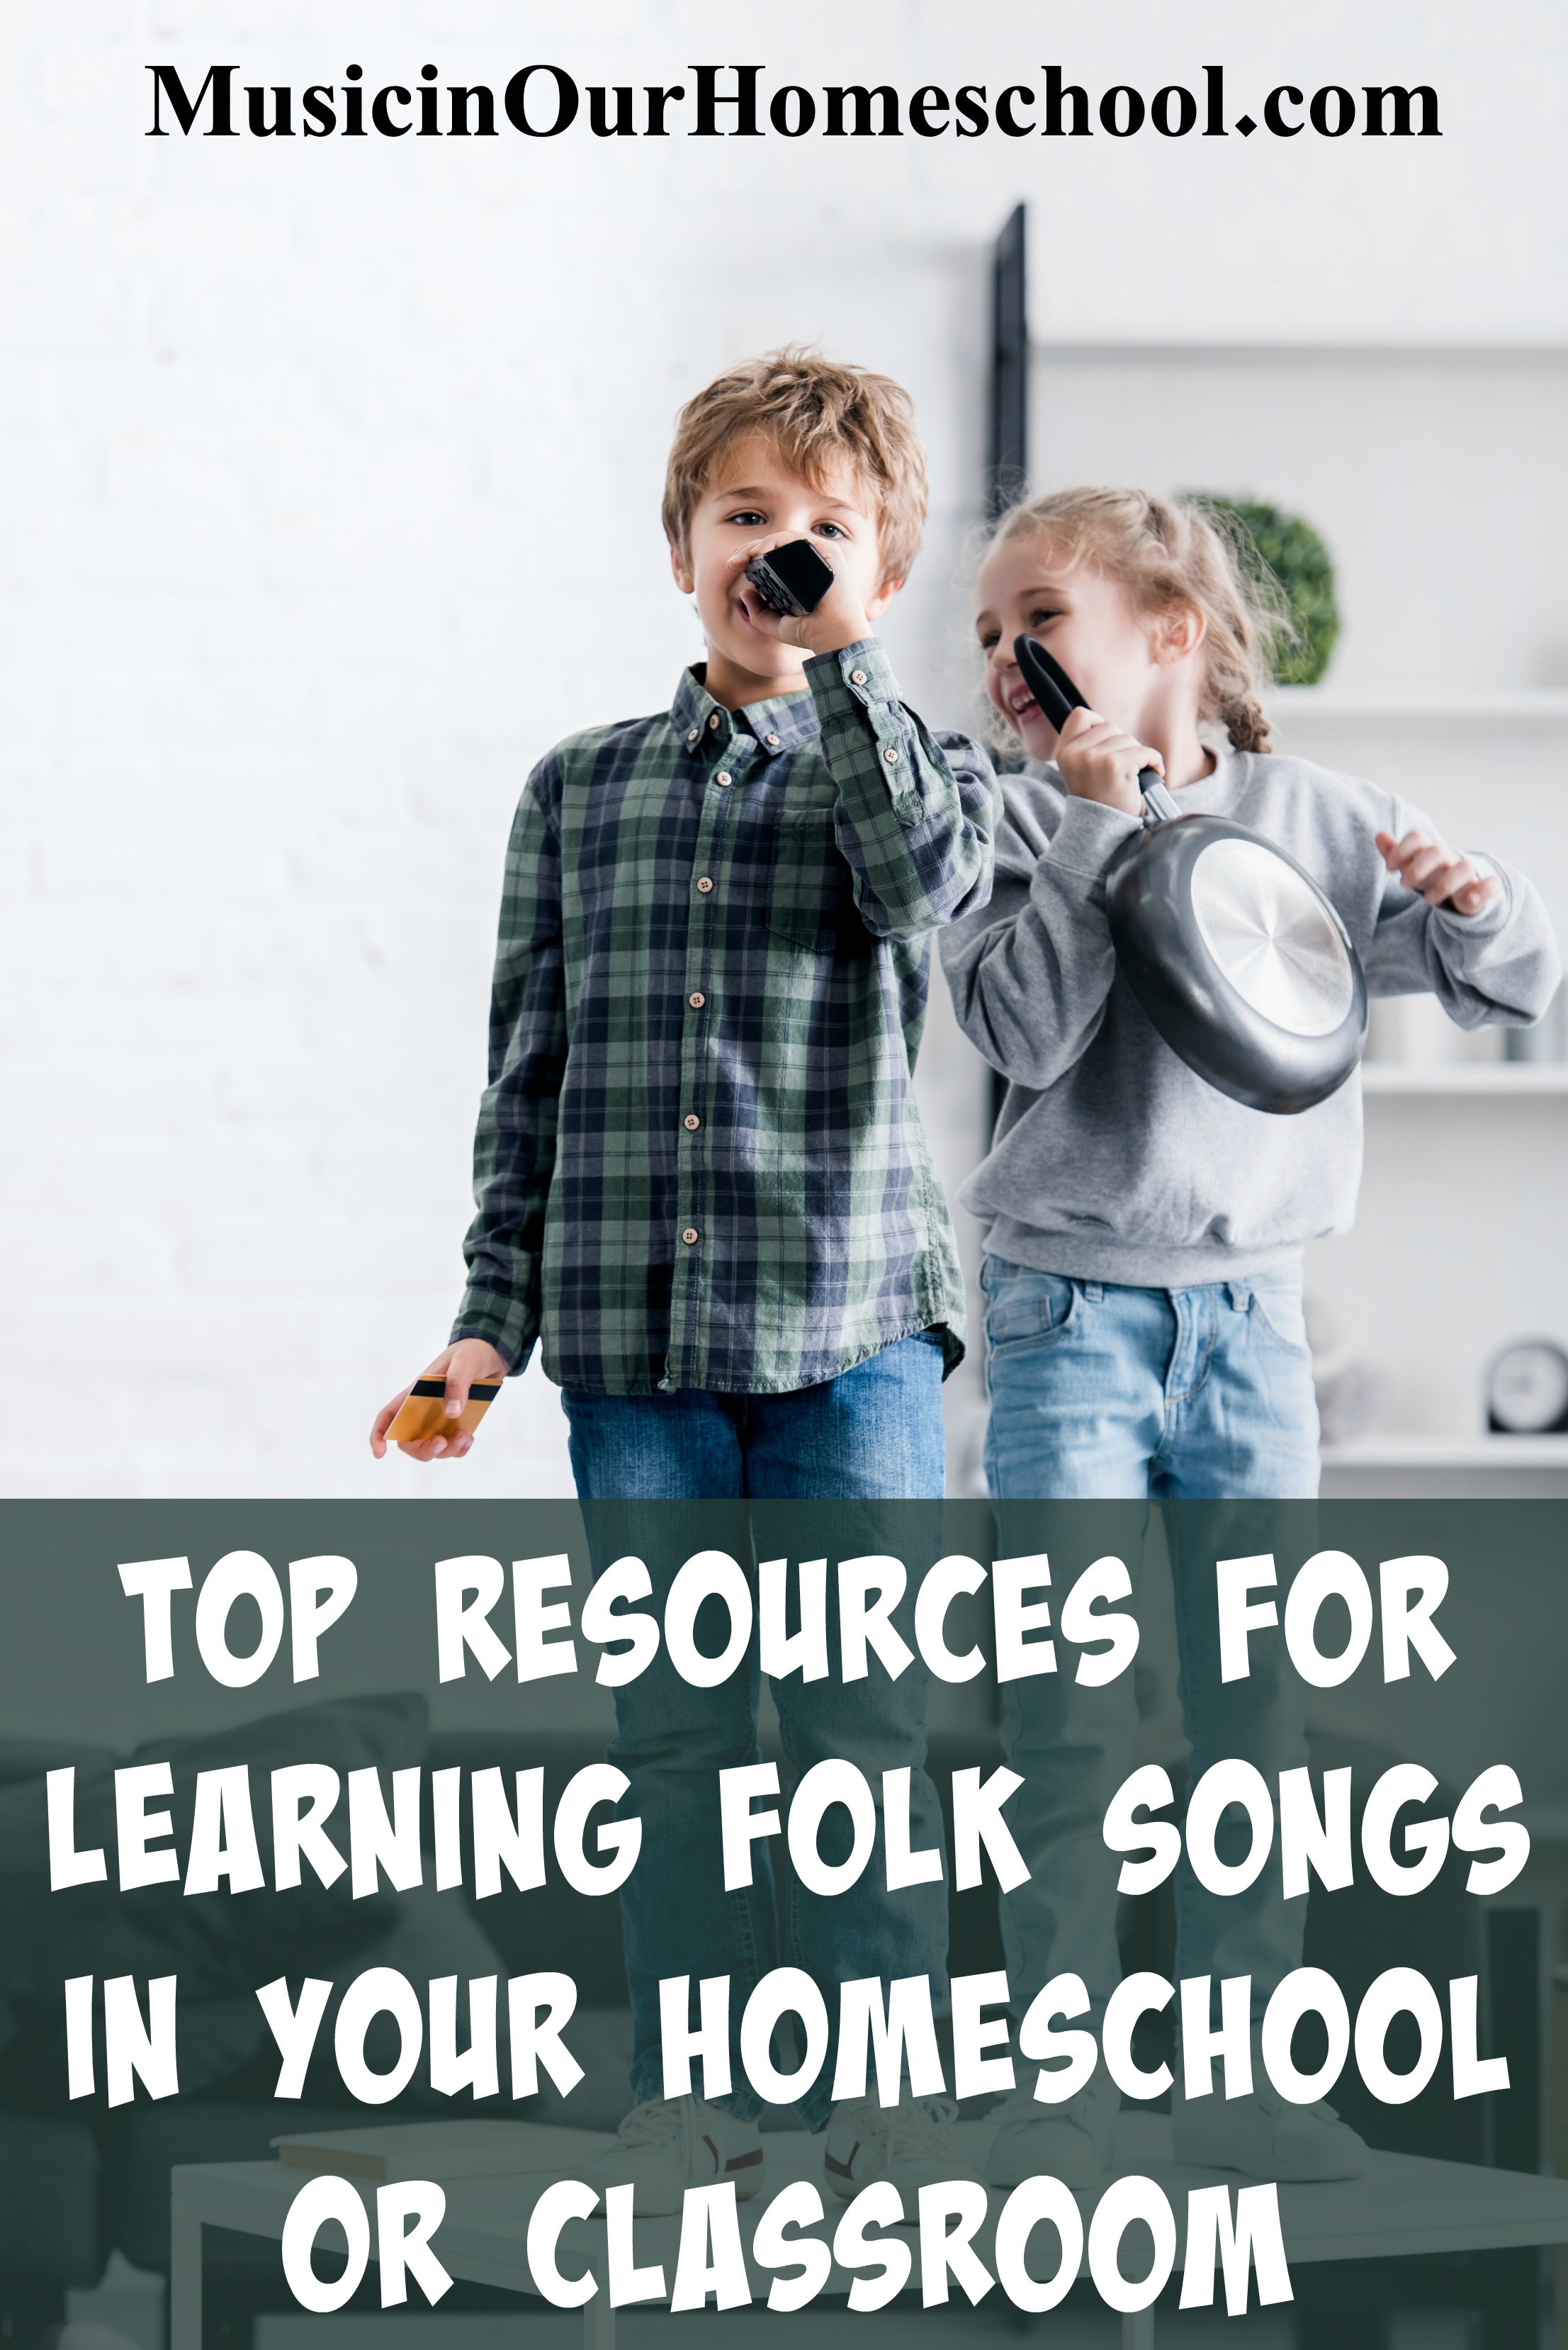 Top Resources for Learning Folk Songs in Your Homeschool or Classroom. Includes books about music, music websites, song lists, CD and other audio ideas